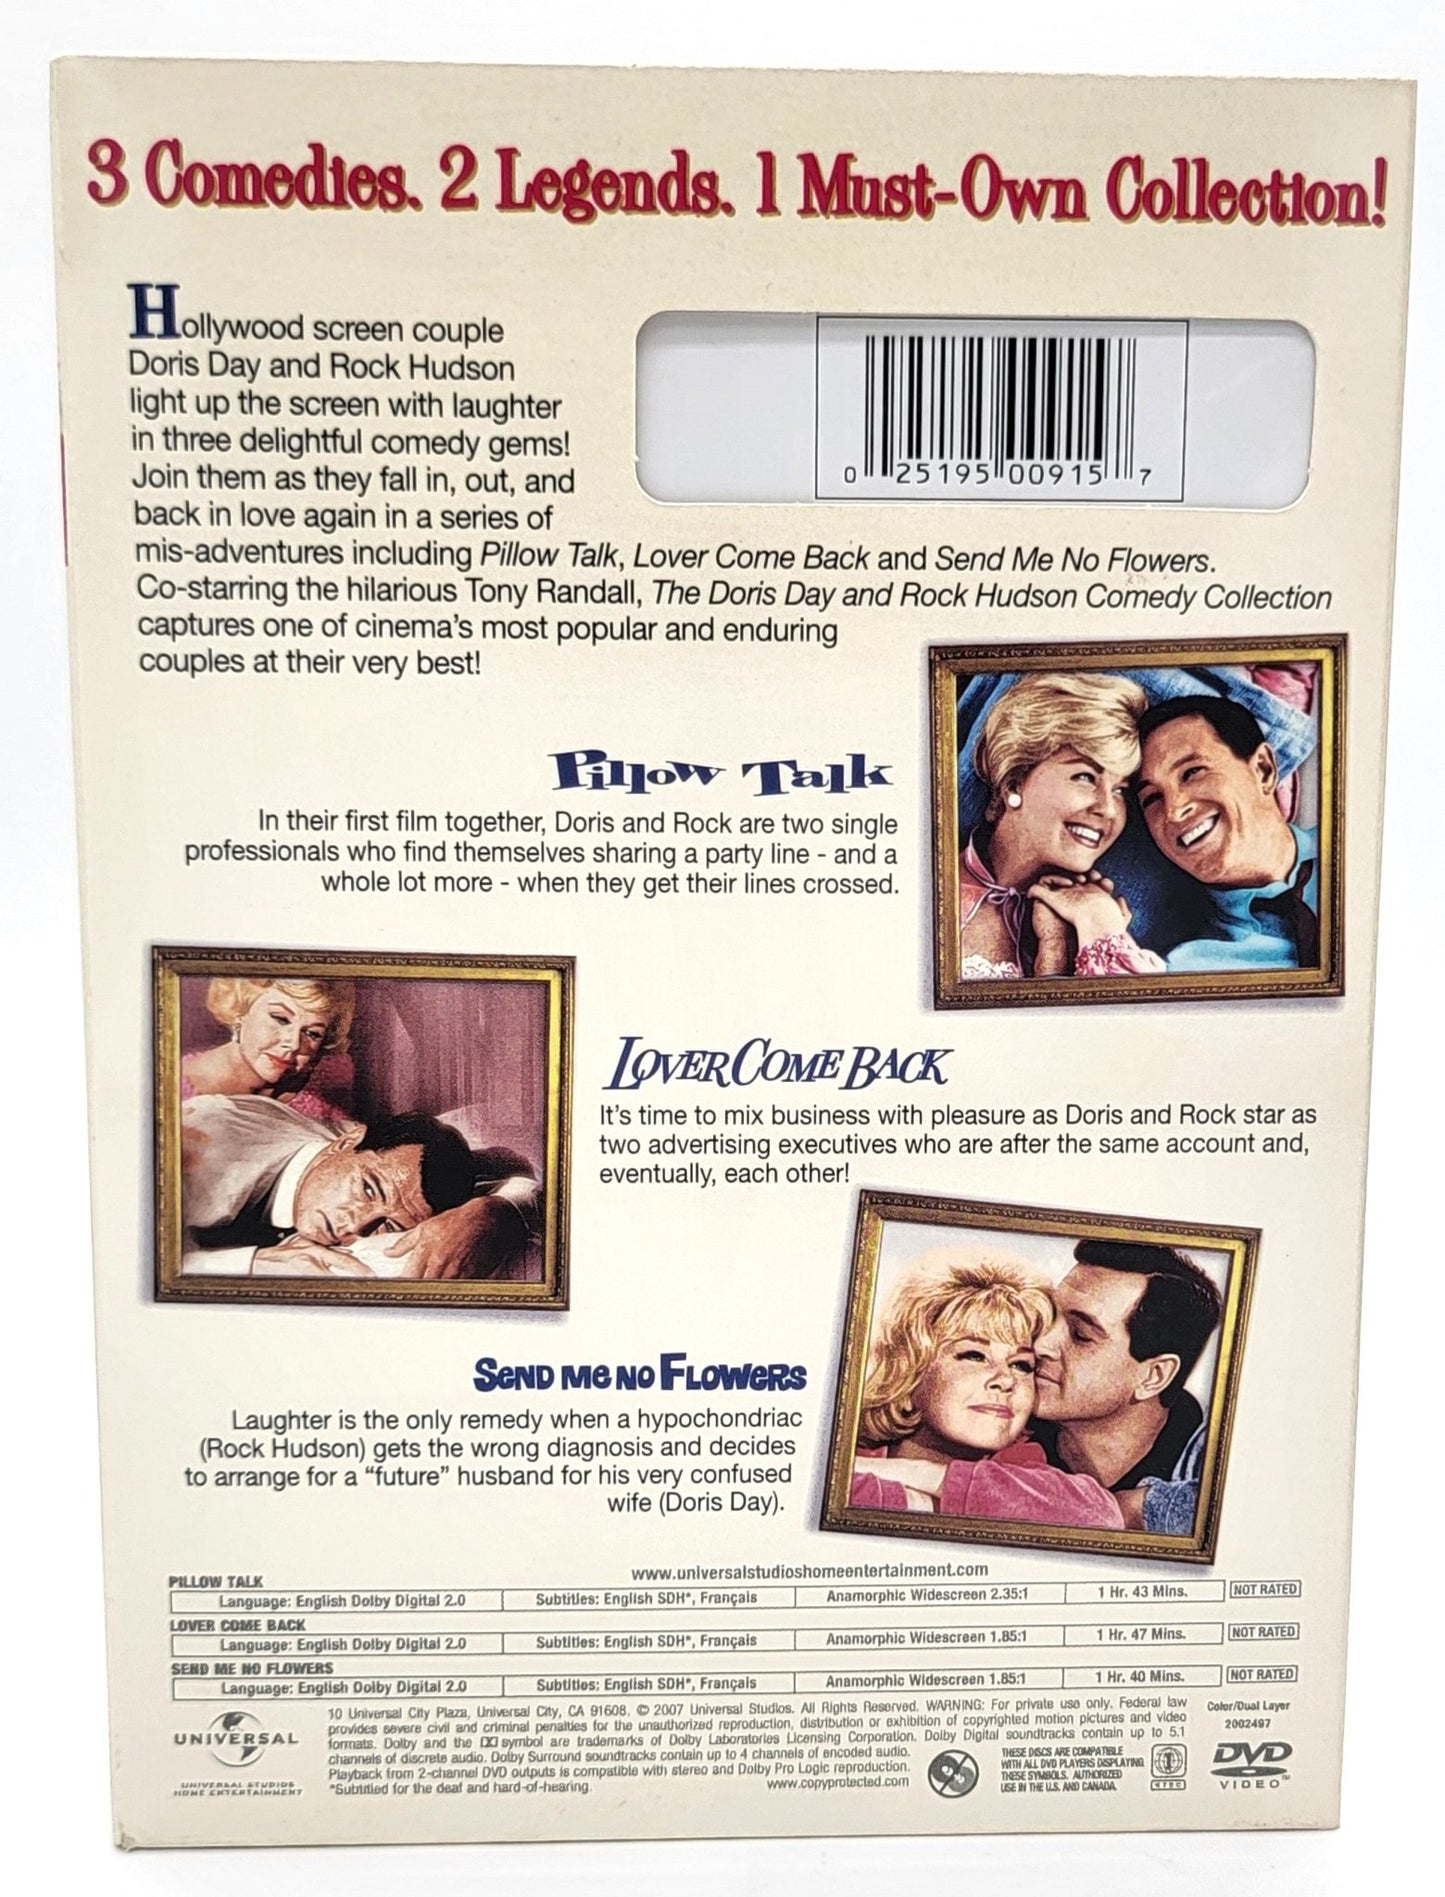 Universal Studios Home Entertainment - The Doris Day and Rock Hudson | DVD | Comedy Collection - DVD - Steady Bunny Shop